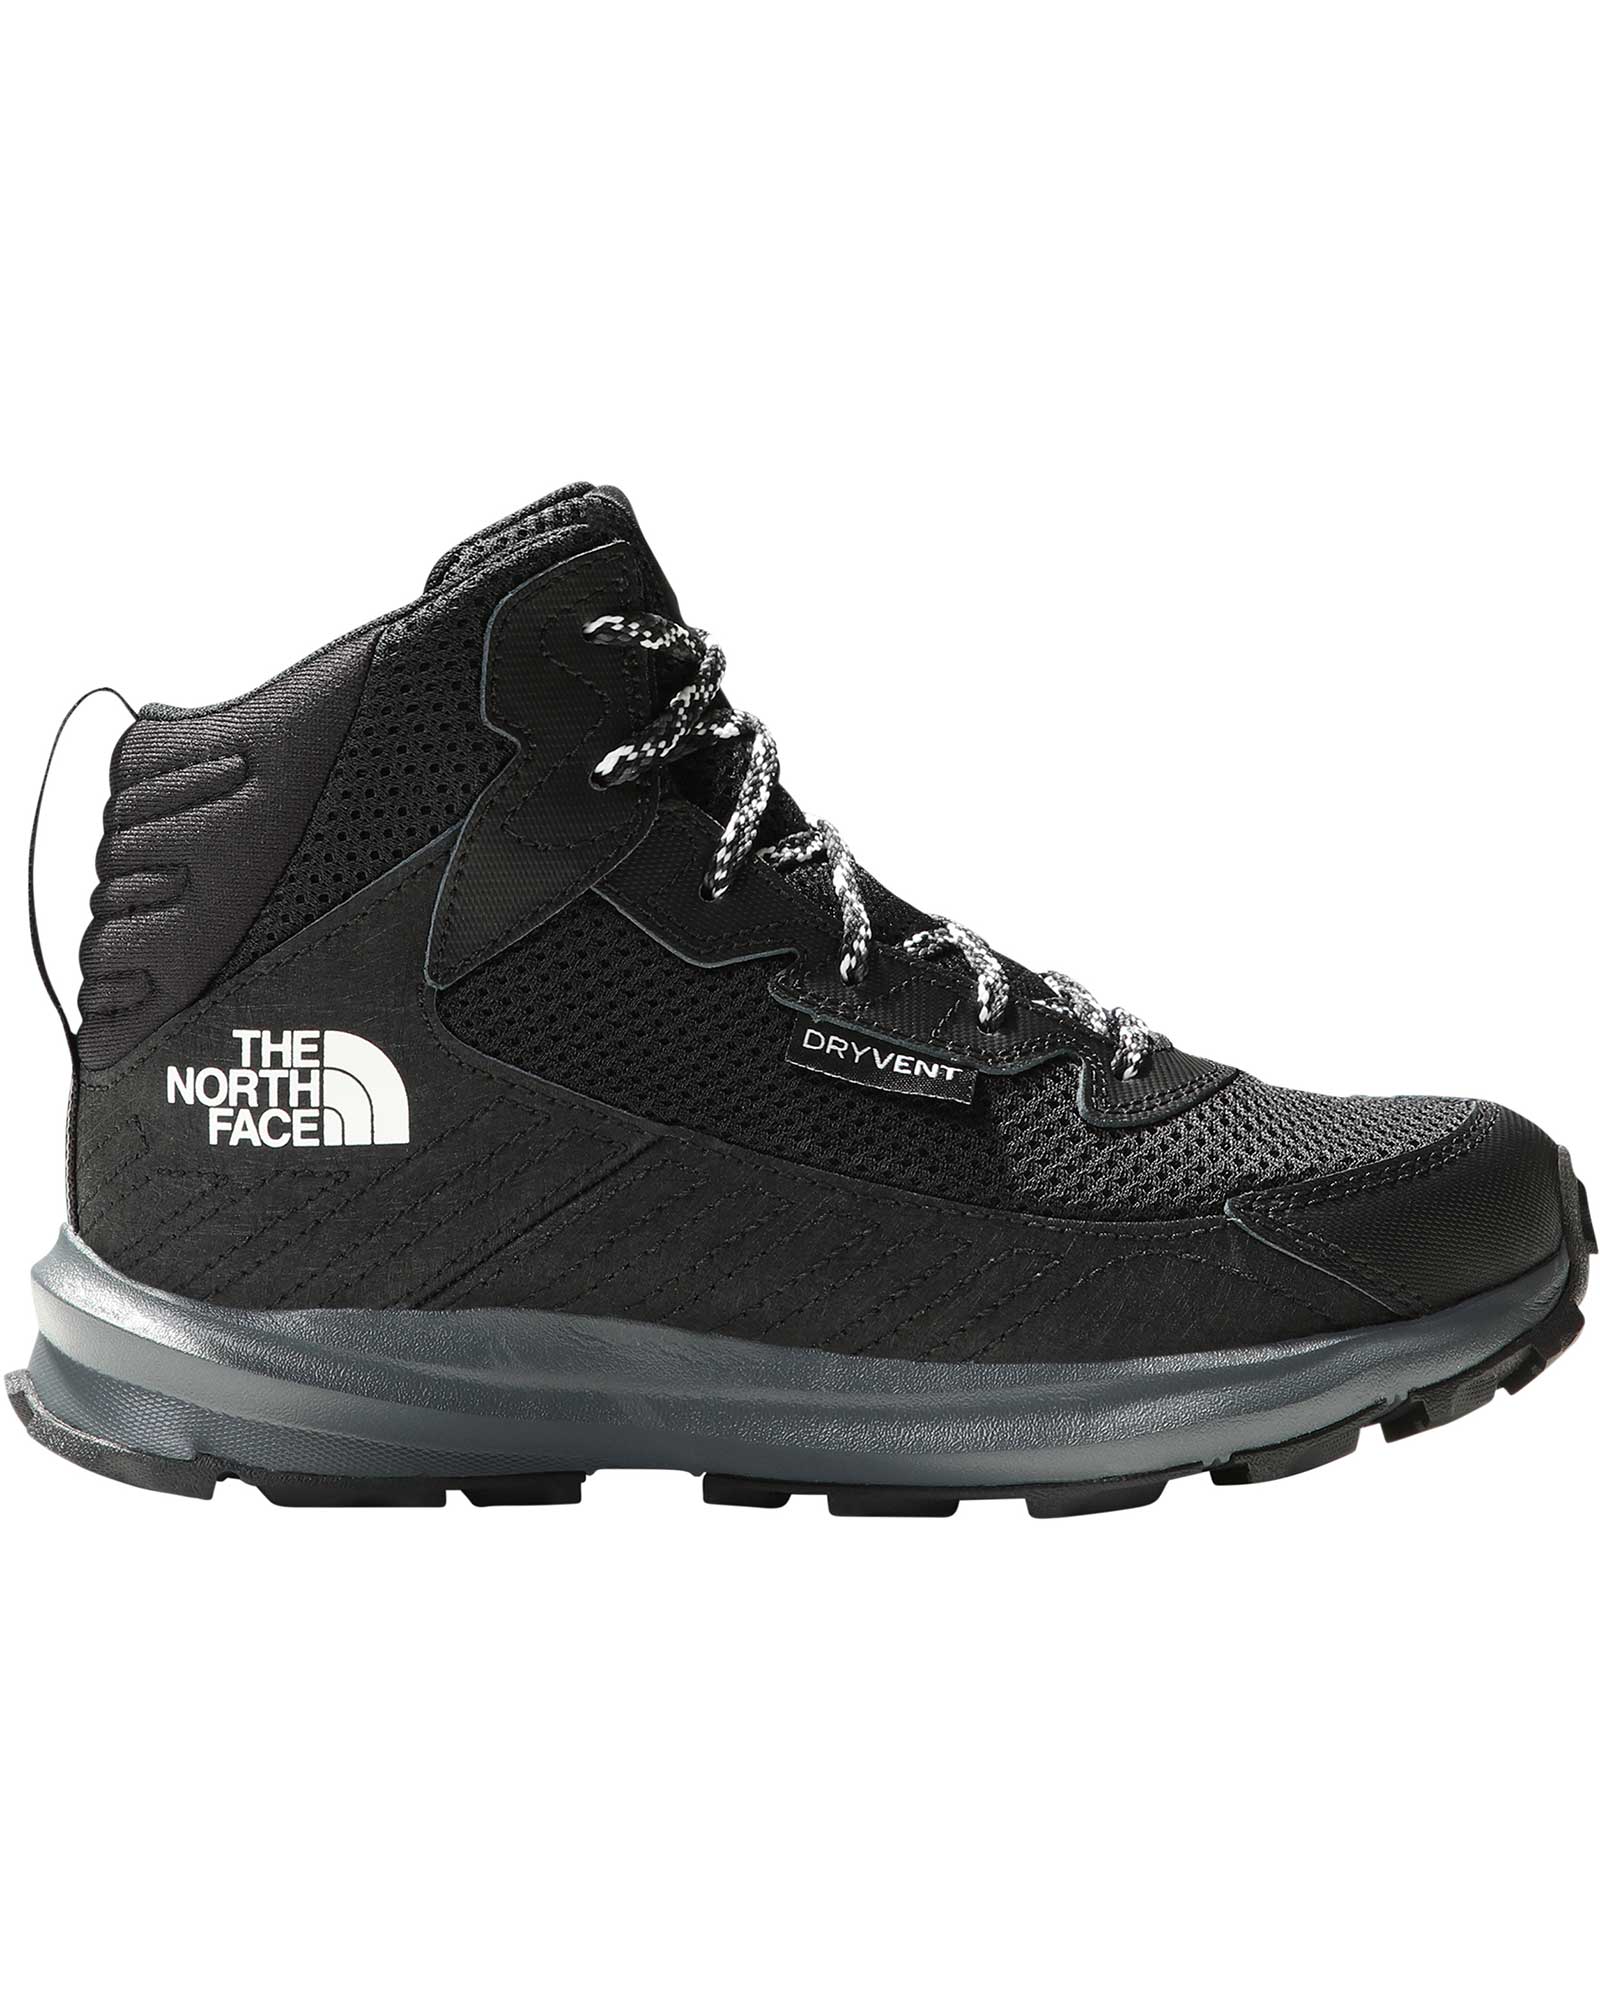 Product image of The North Face Y Fastpack Hiker Mid Waterproof Kids' Boots